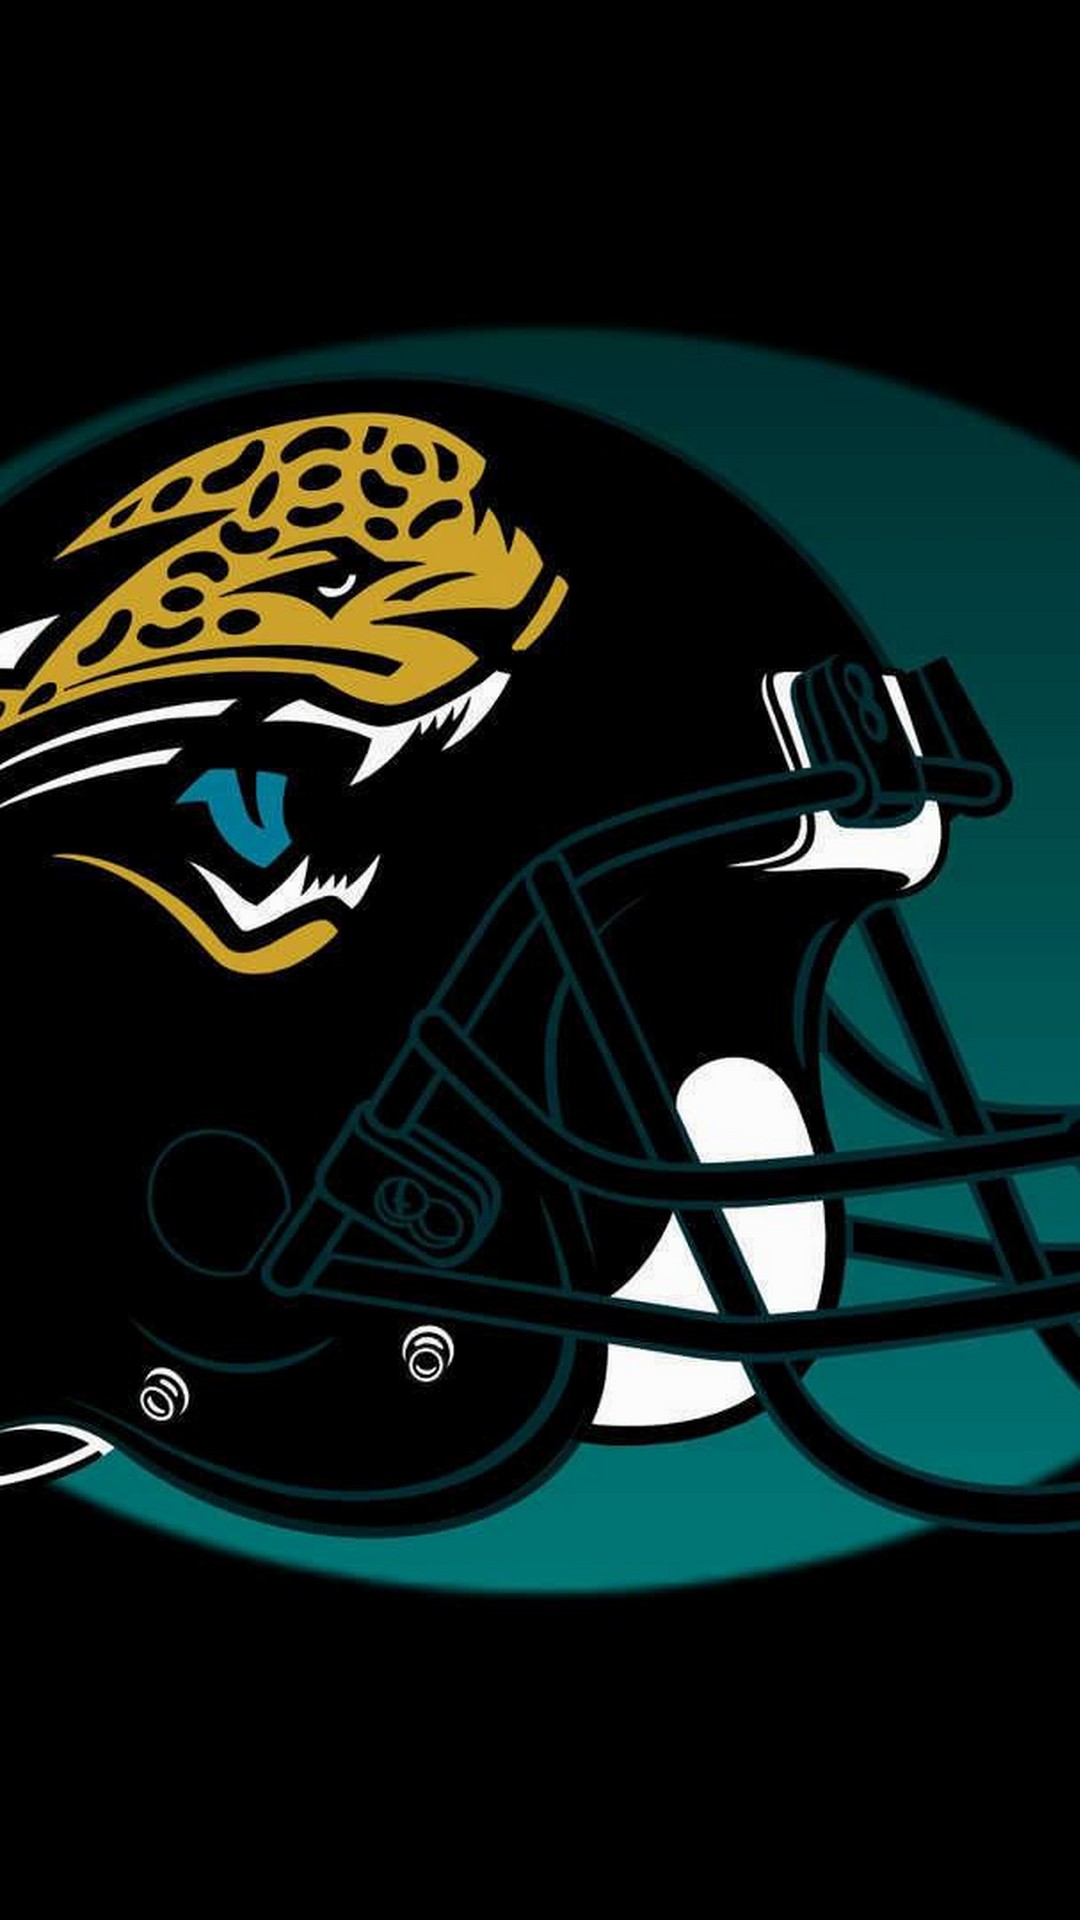 Jacksonville Jaguars iPhone Screen Lock Wallpaper with high-resolution 1080x1920 pixel. Download and set as wallpaper for Desktop Computer, Apple iPhone X, XS Max, XR, 8, 7, 6, SE, iPad, Android